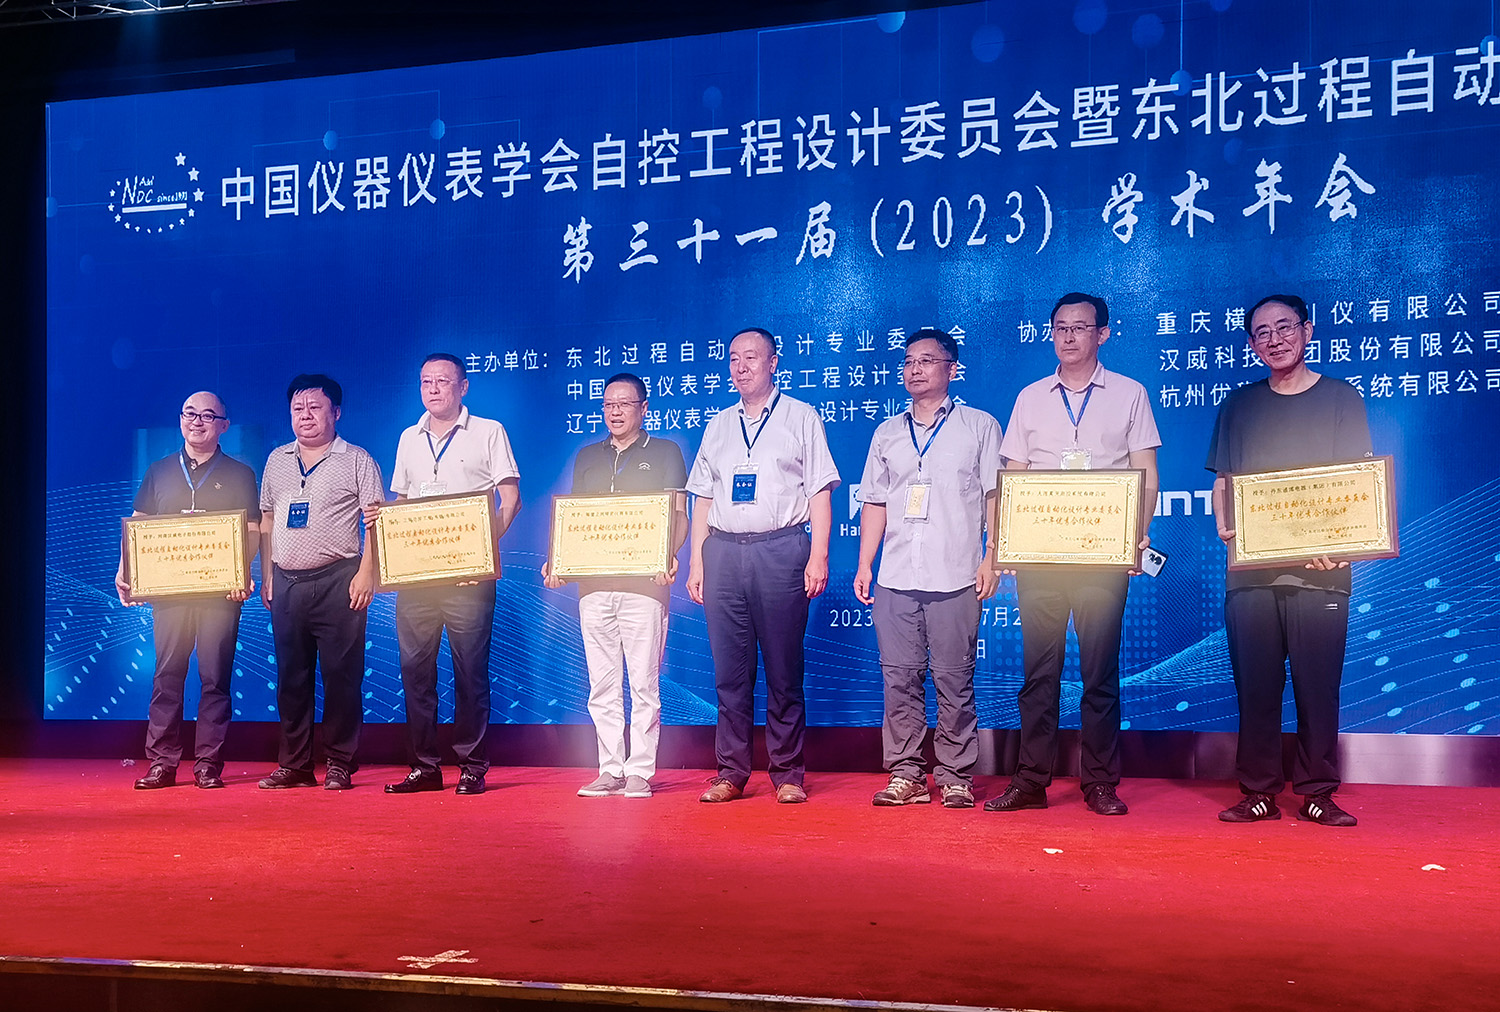 Fujian WIDE PLUS was awarded the 30-year Outstanding Partner of the Northeast Process Automation Design Committee